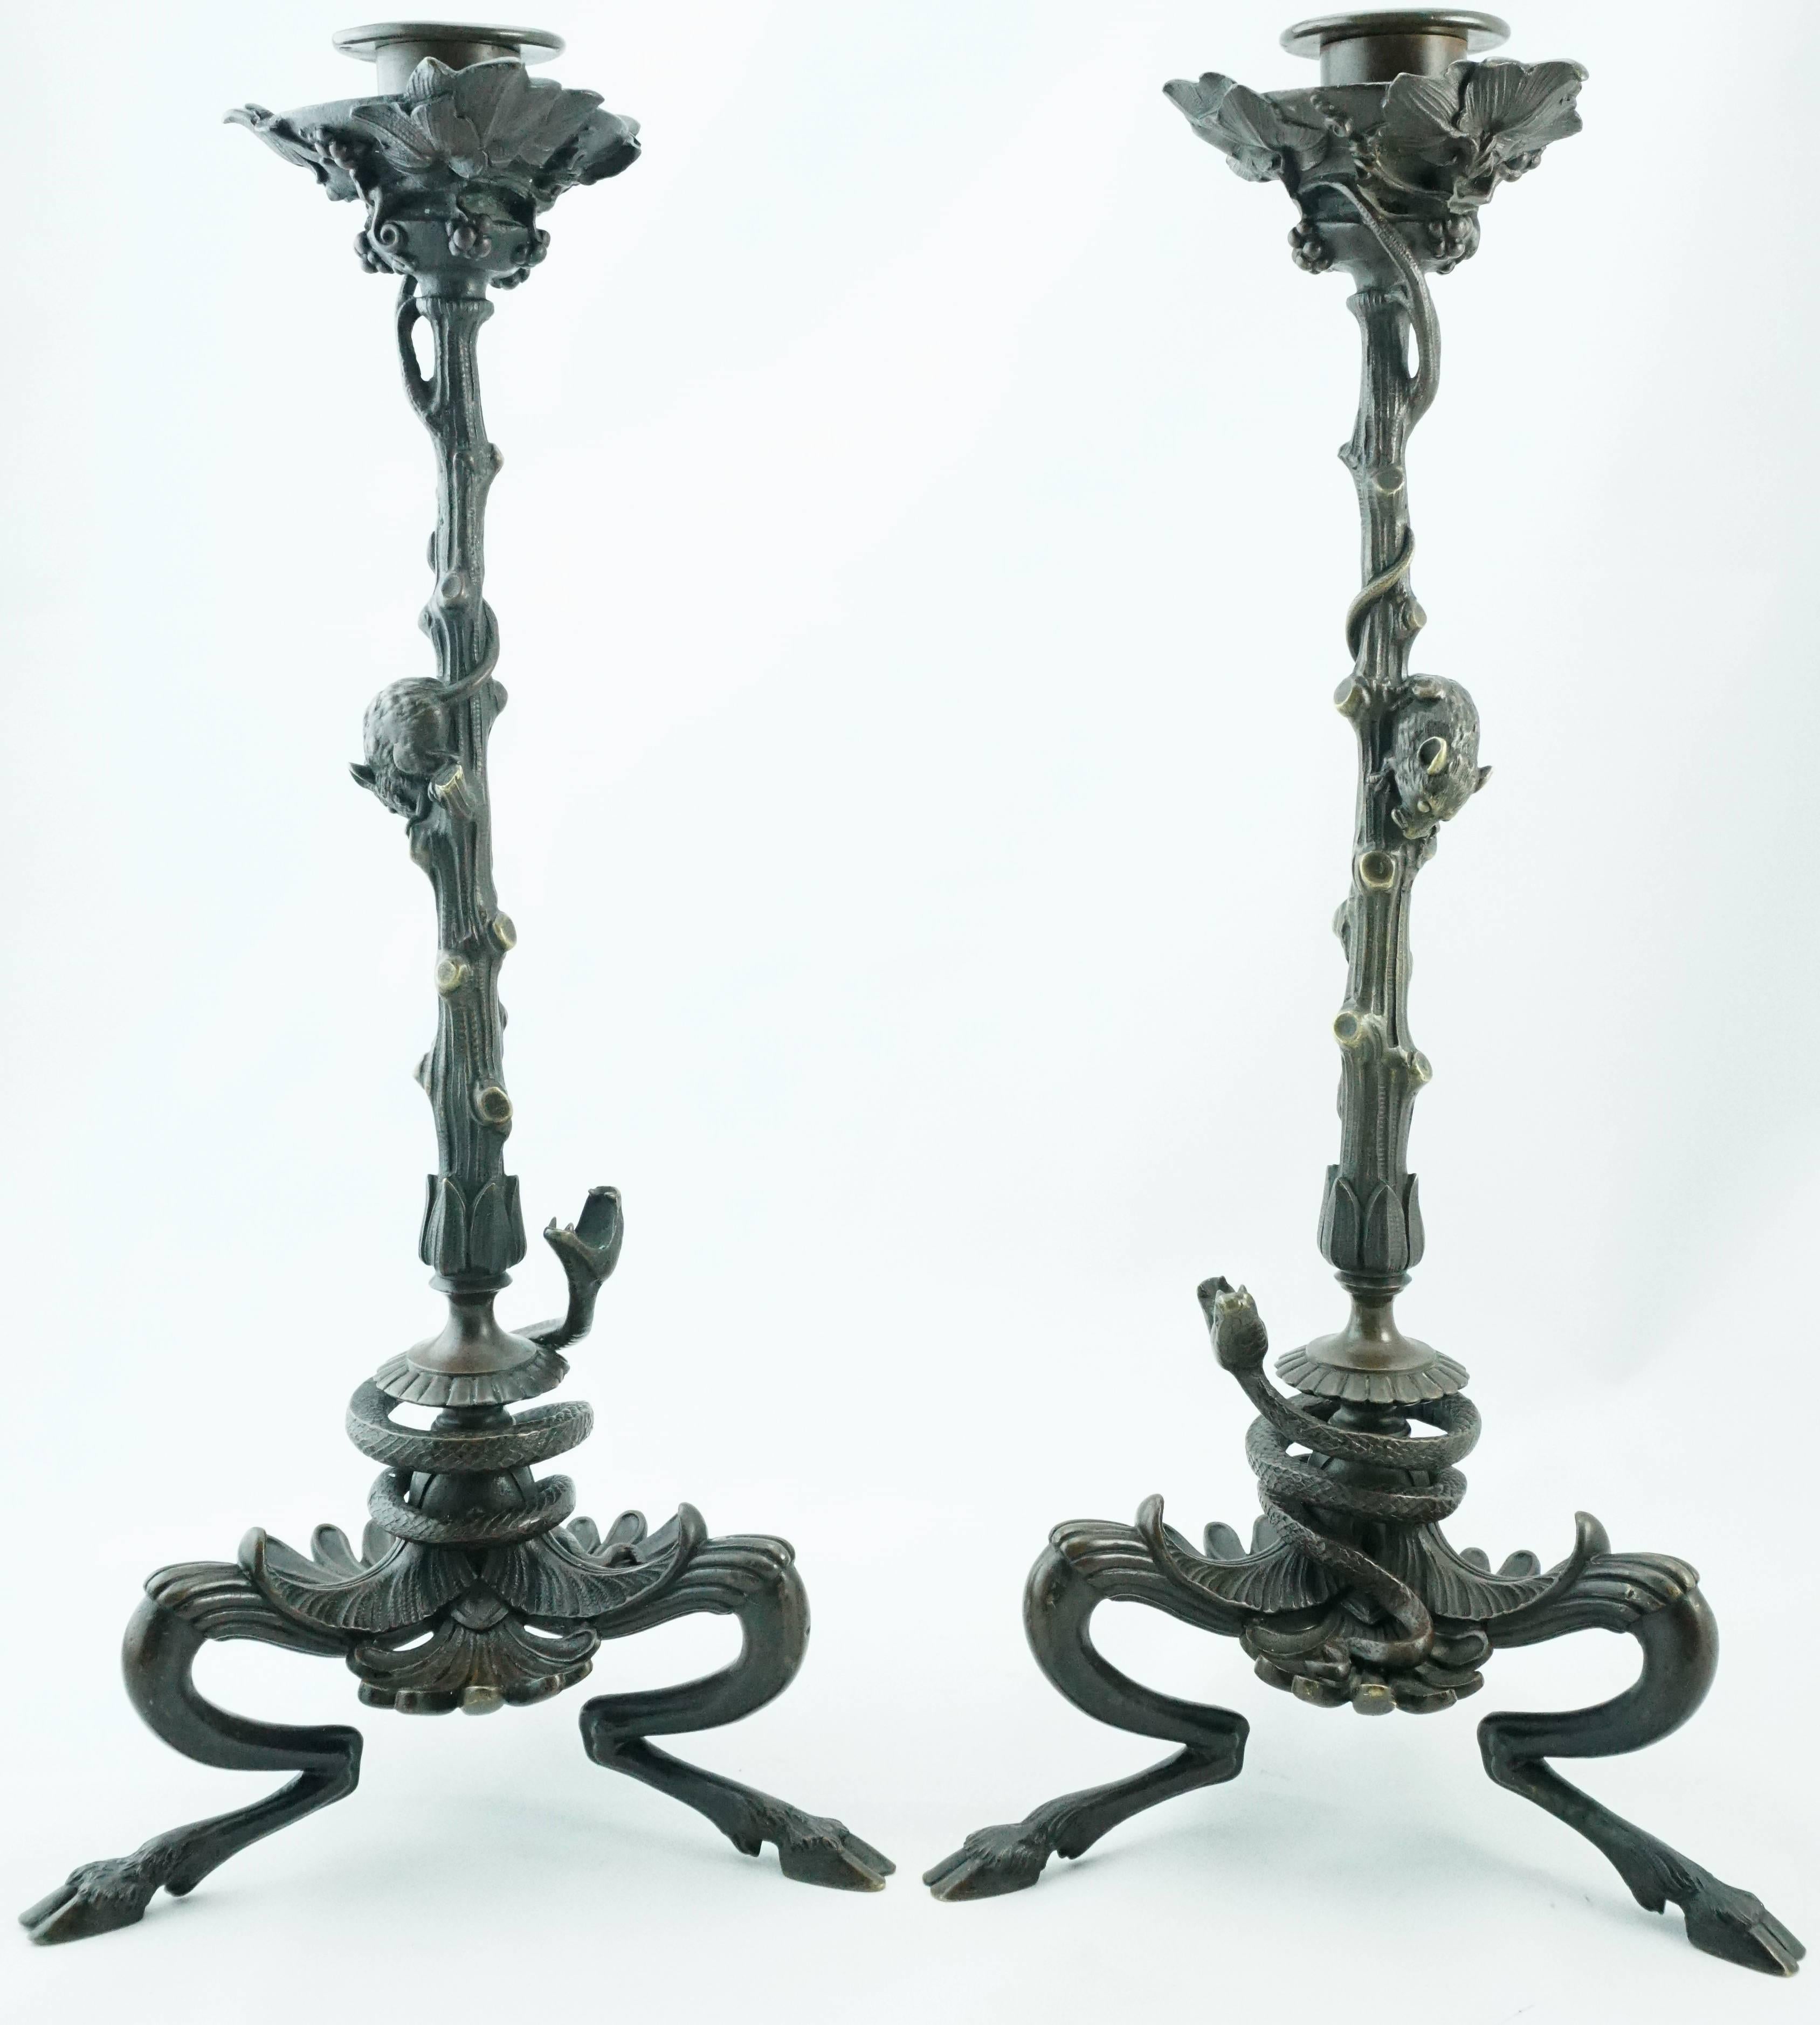 Victor Paillard pair of bronze snake and mouse candlelabra, circa 1865. A beautiful pair of single one light candlestick candelabra depicting coiled viper snakes ready to strike descending mice or mouses atop three legged bases in exquisite detail